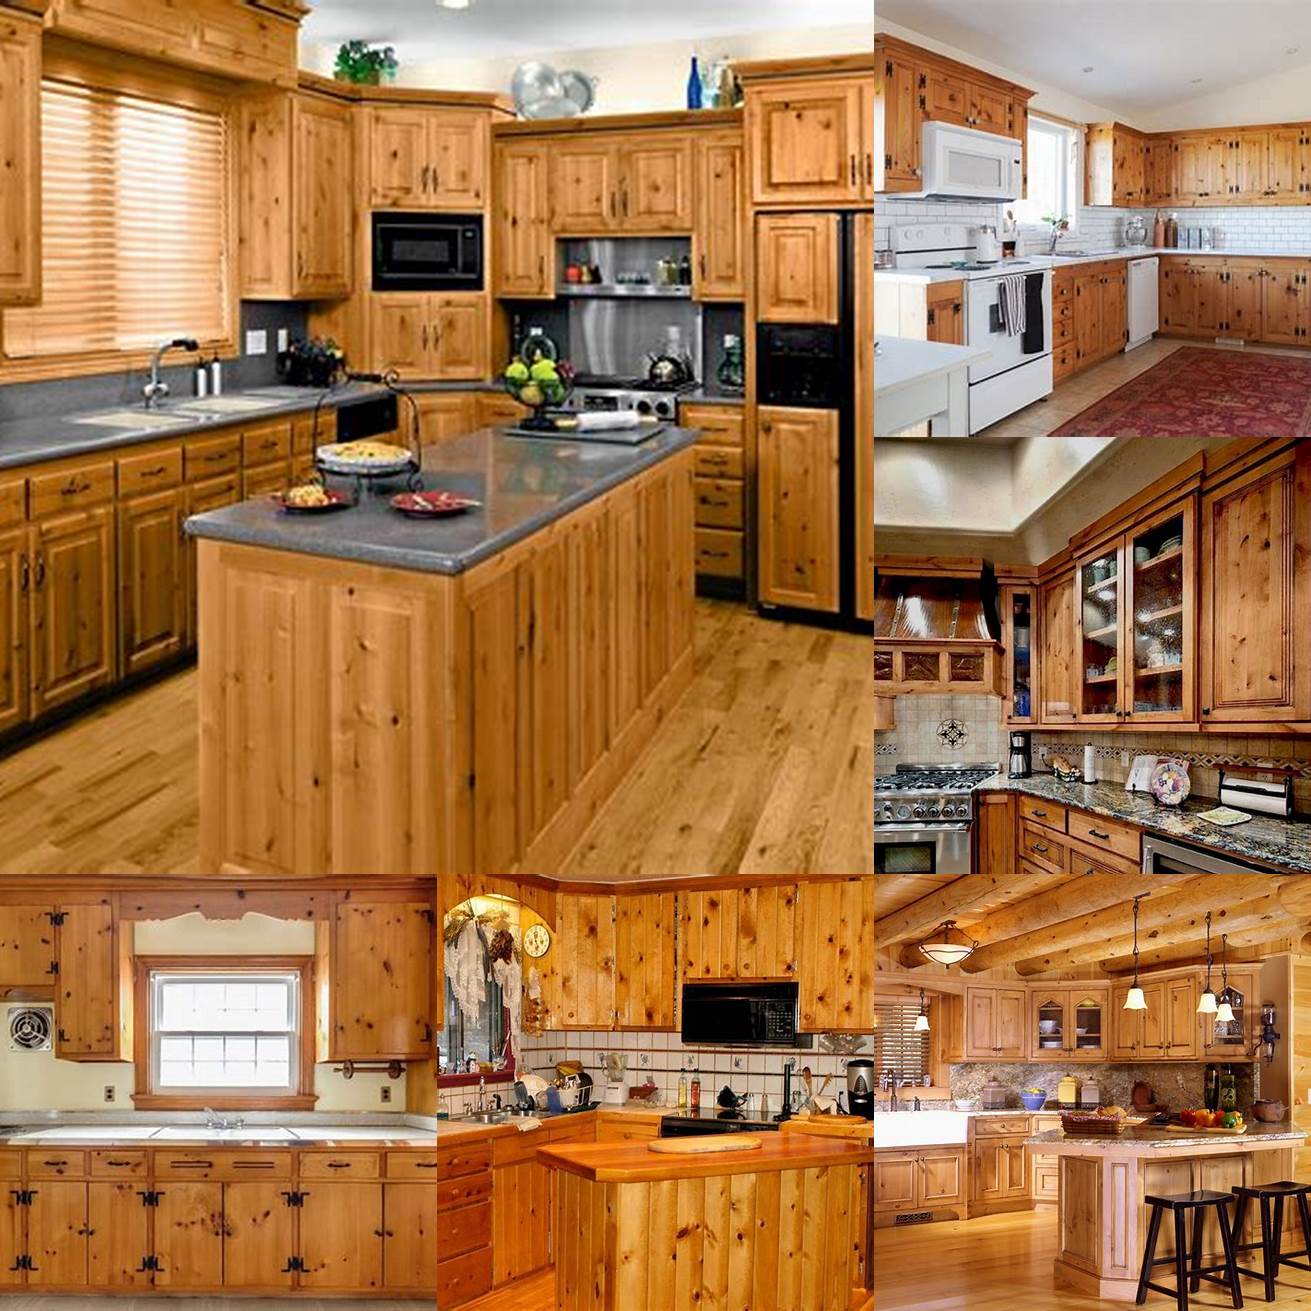 Pine cabinets can help make a small kitchen feel more open and inviting